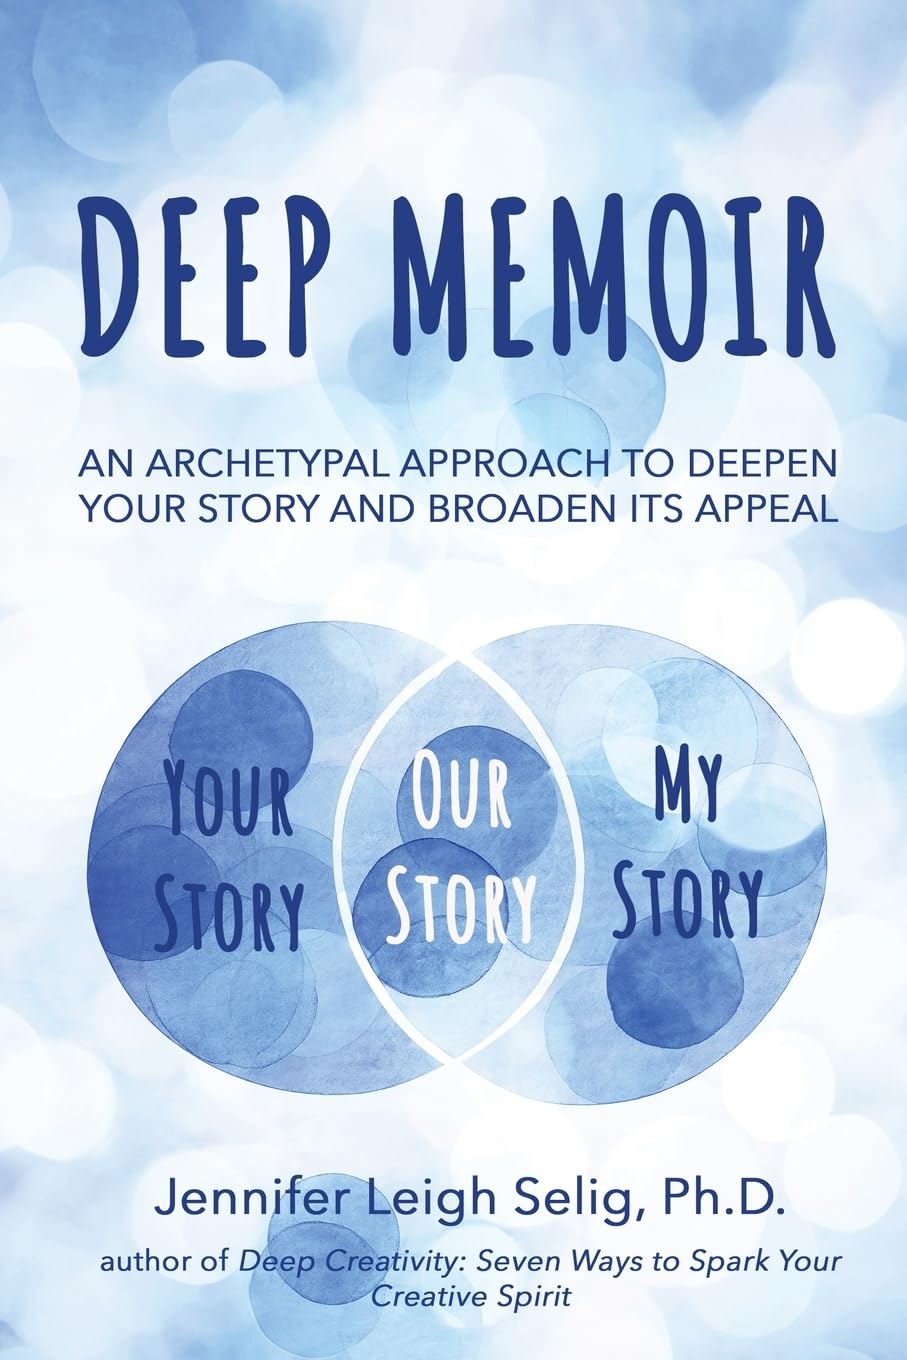 Deep Memoir: An Archetypal Approach to Deepen Your Story and Broaden Its Appeal